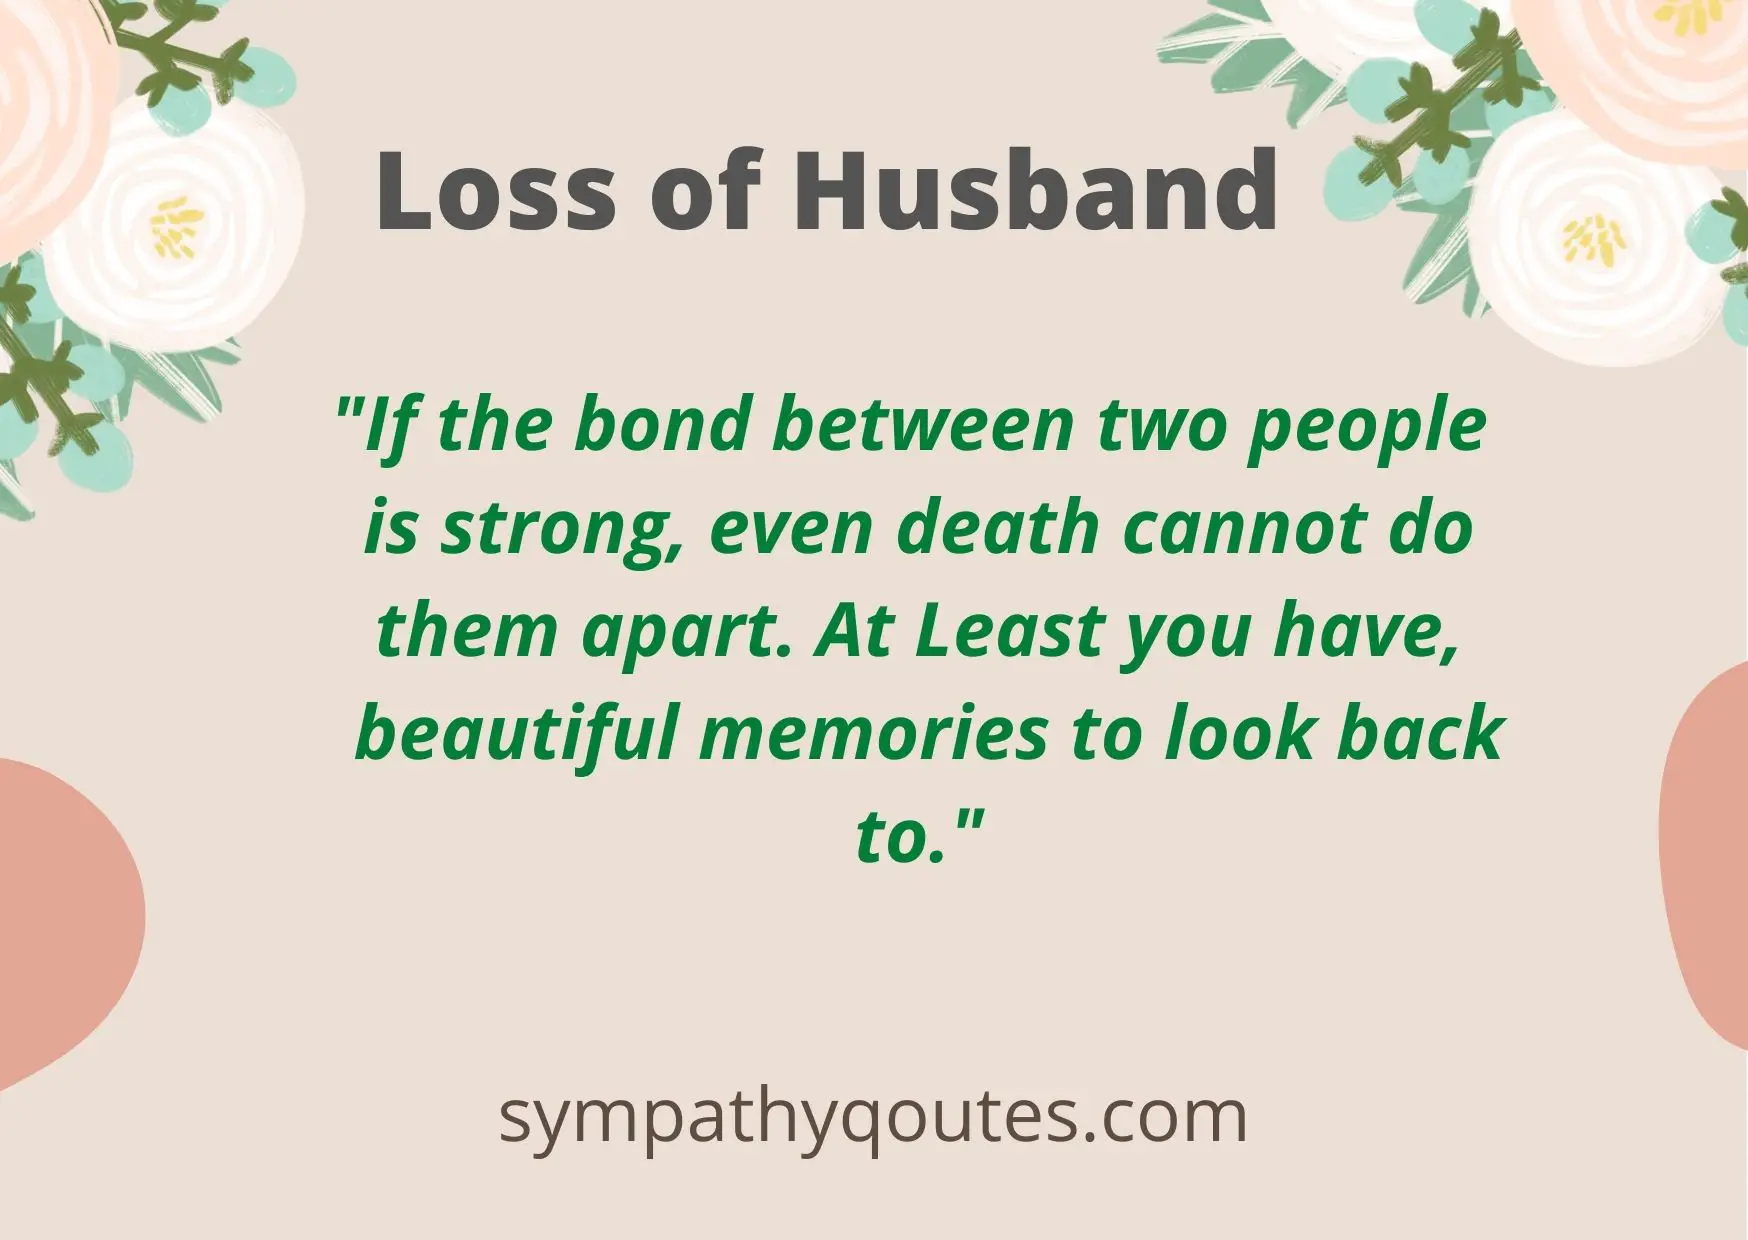  Sympathy Messages for Loss of Husband